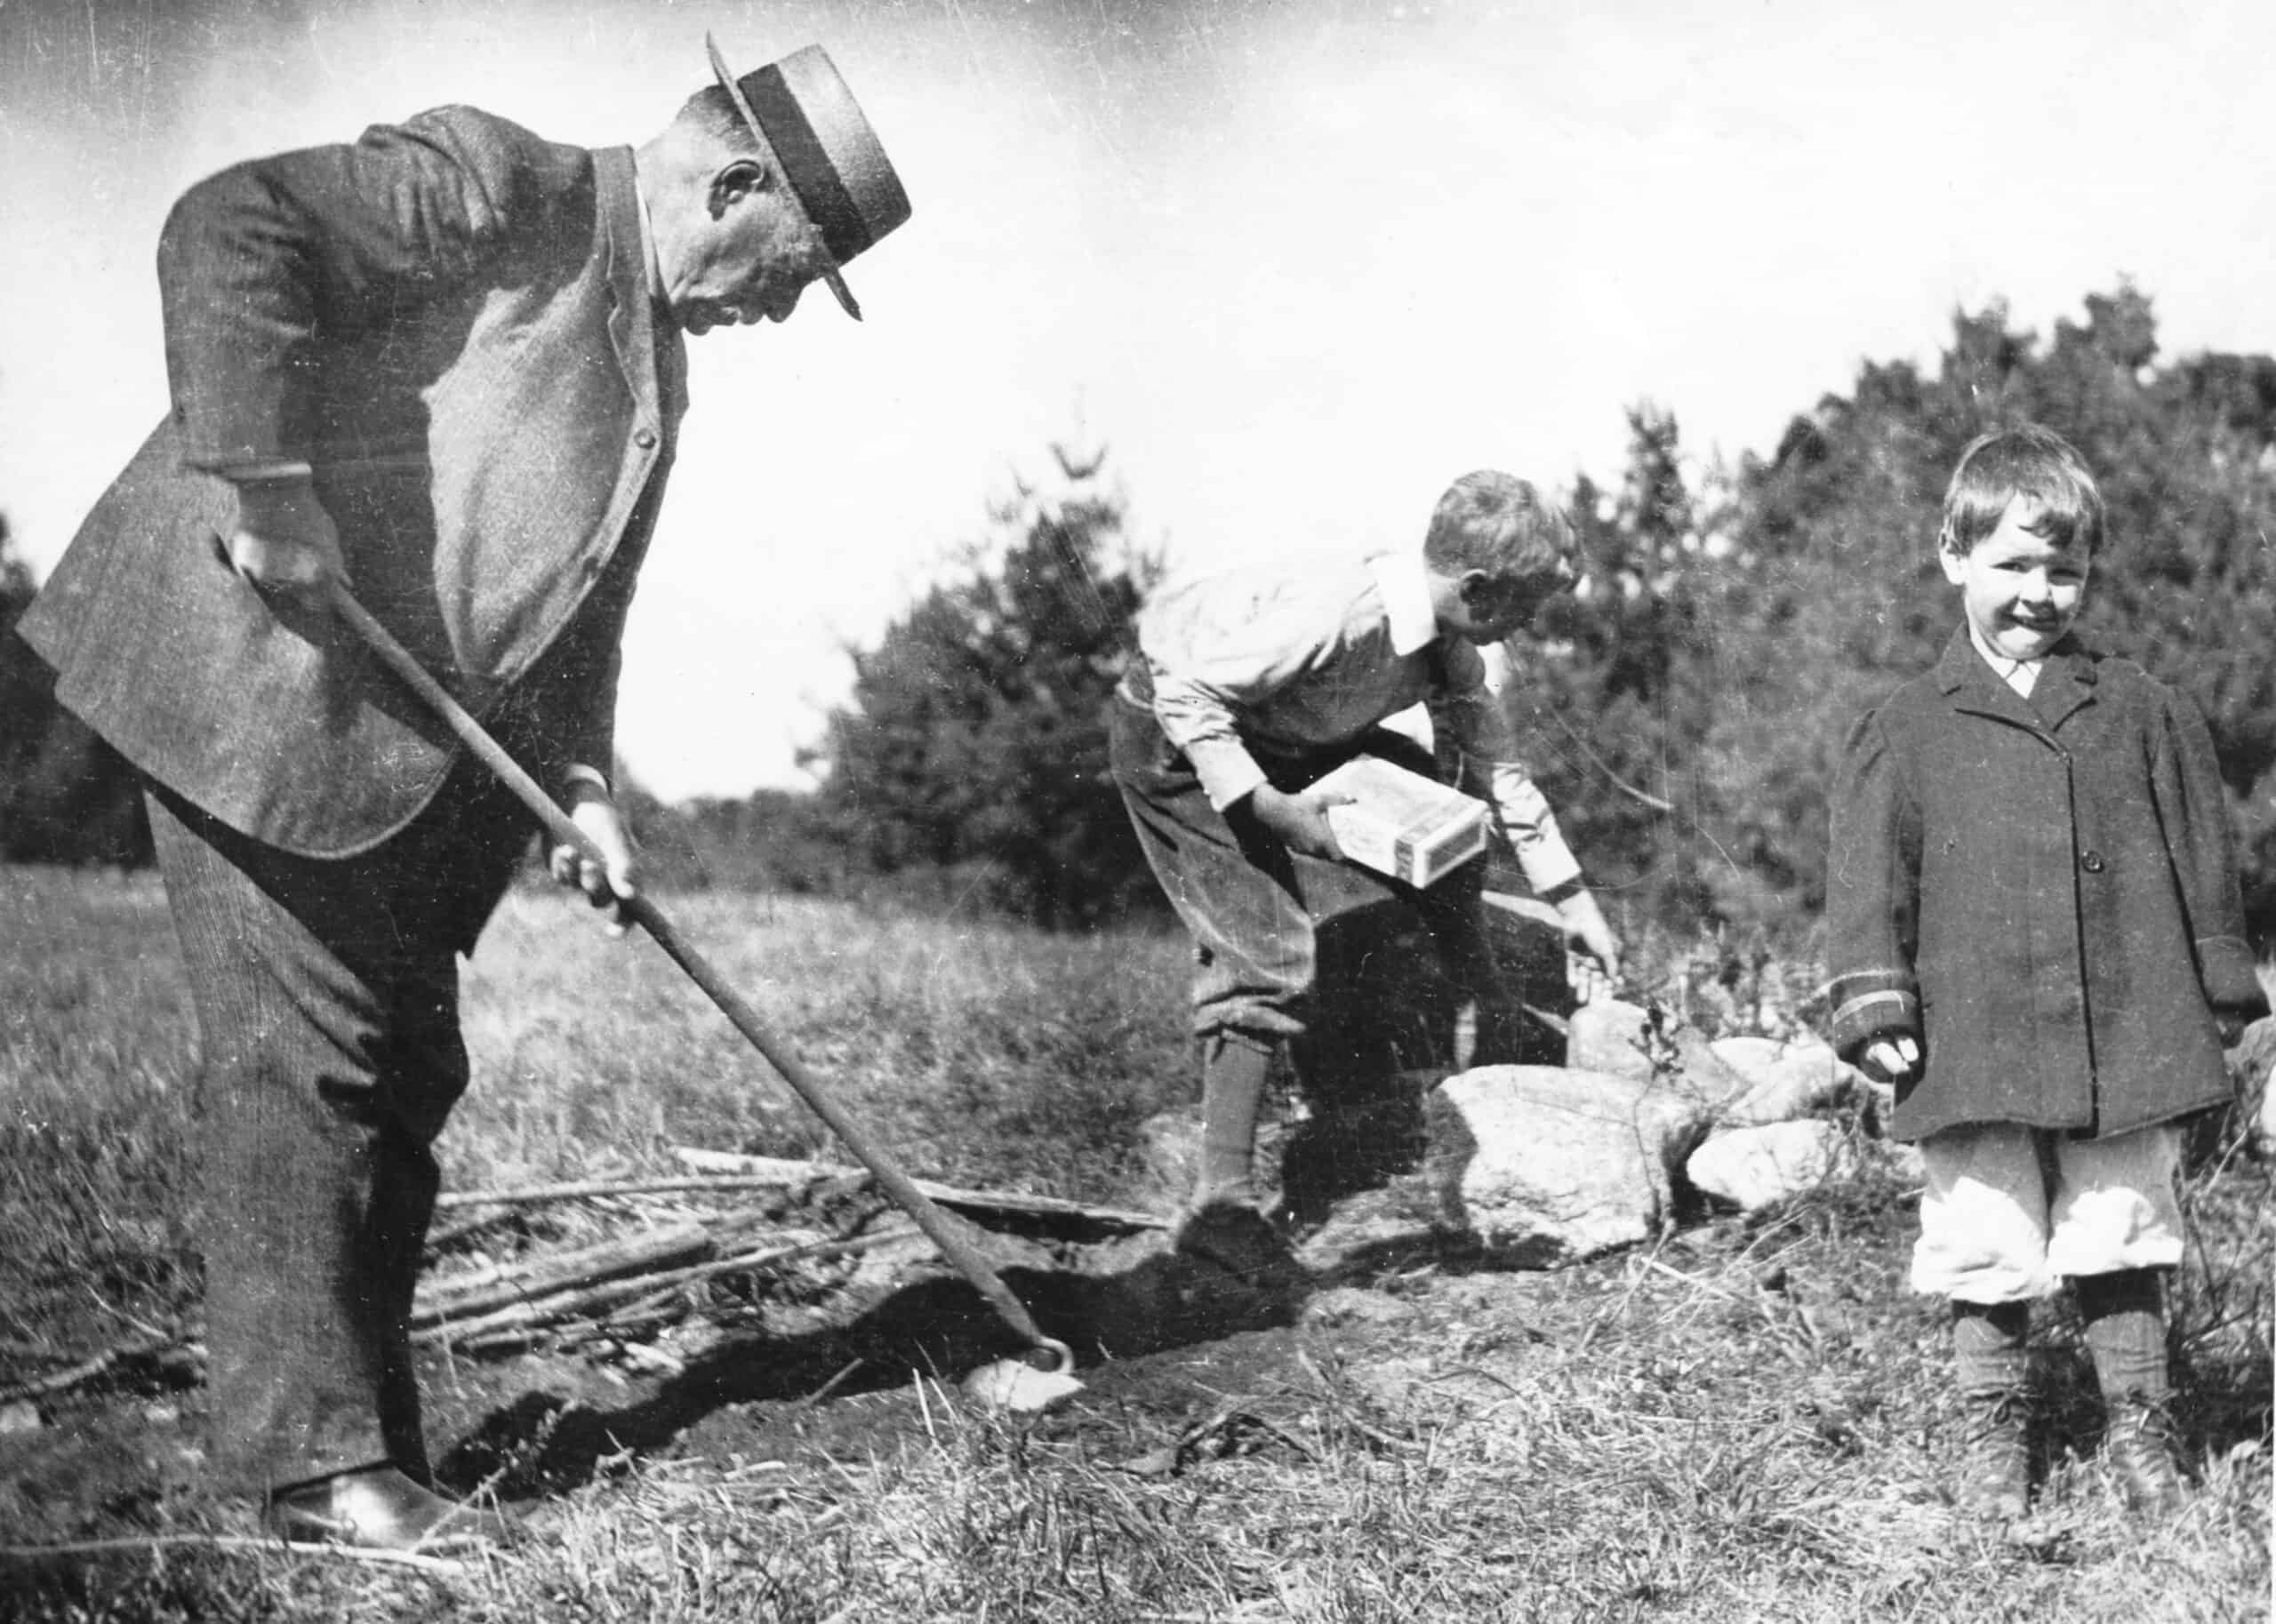 President Grover Cleveland (1837-1908) gardening at his summer home in Tamworth, New Hampshire, USA, circa 1900. (Photo by Kean Collection/Getty Images)